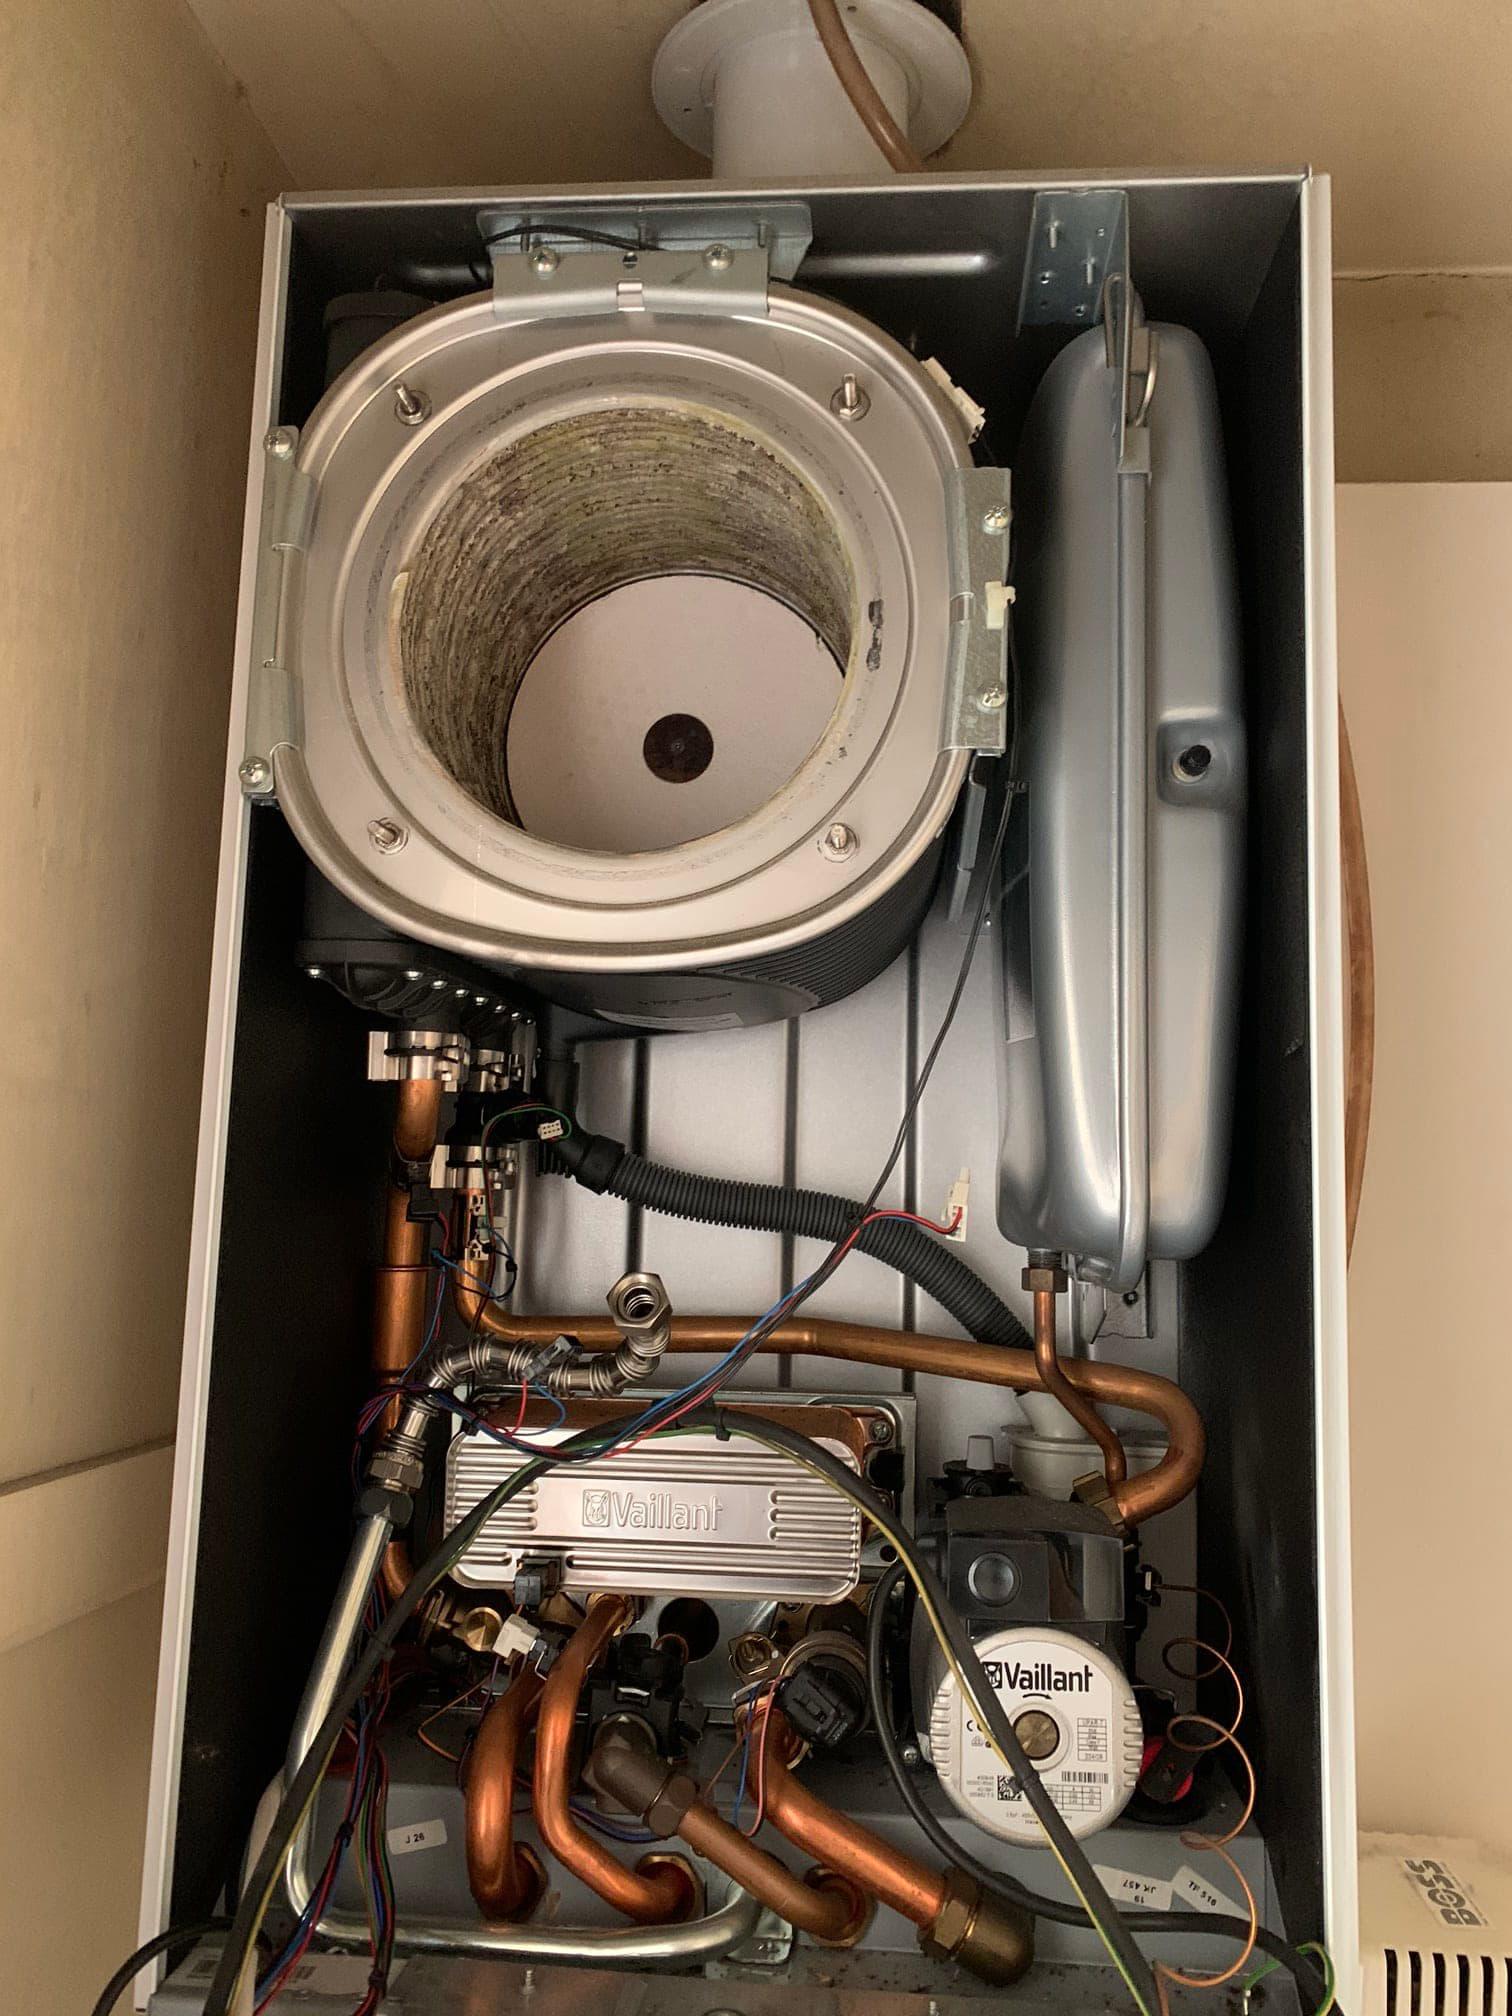 Images Complete Gas Heating Services Ltd